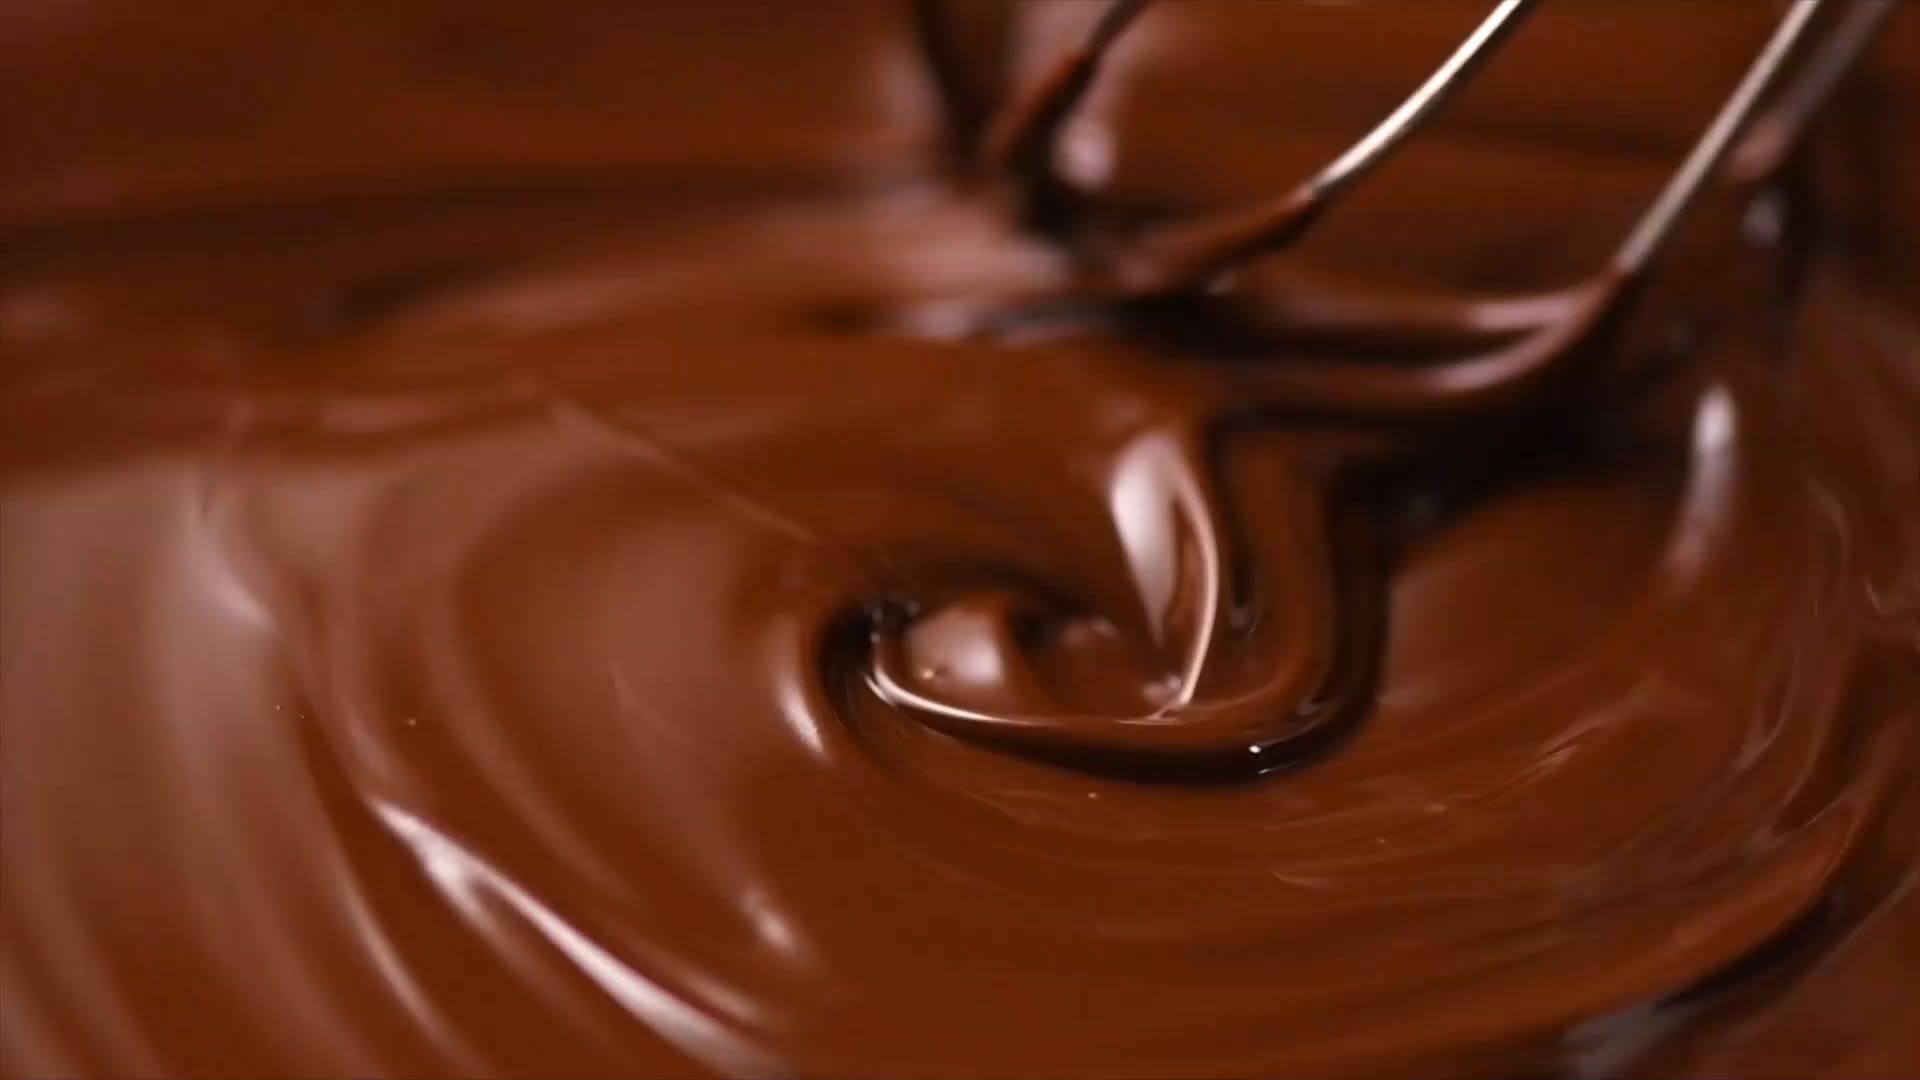 Can I use regular chocolate for coating?